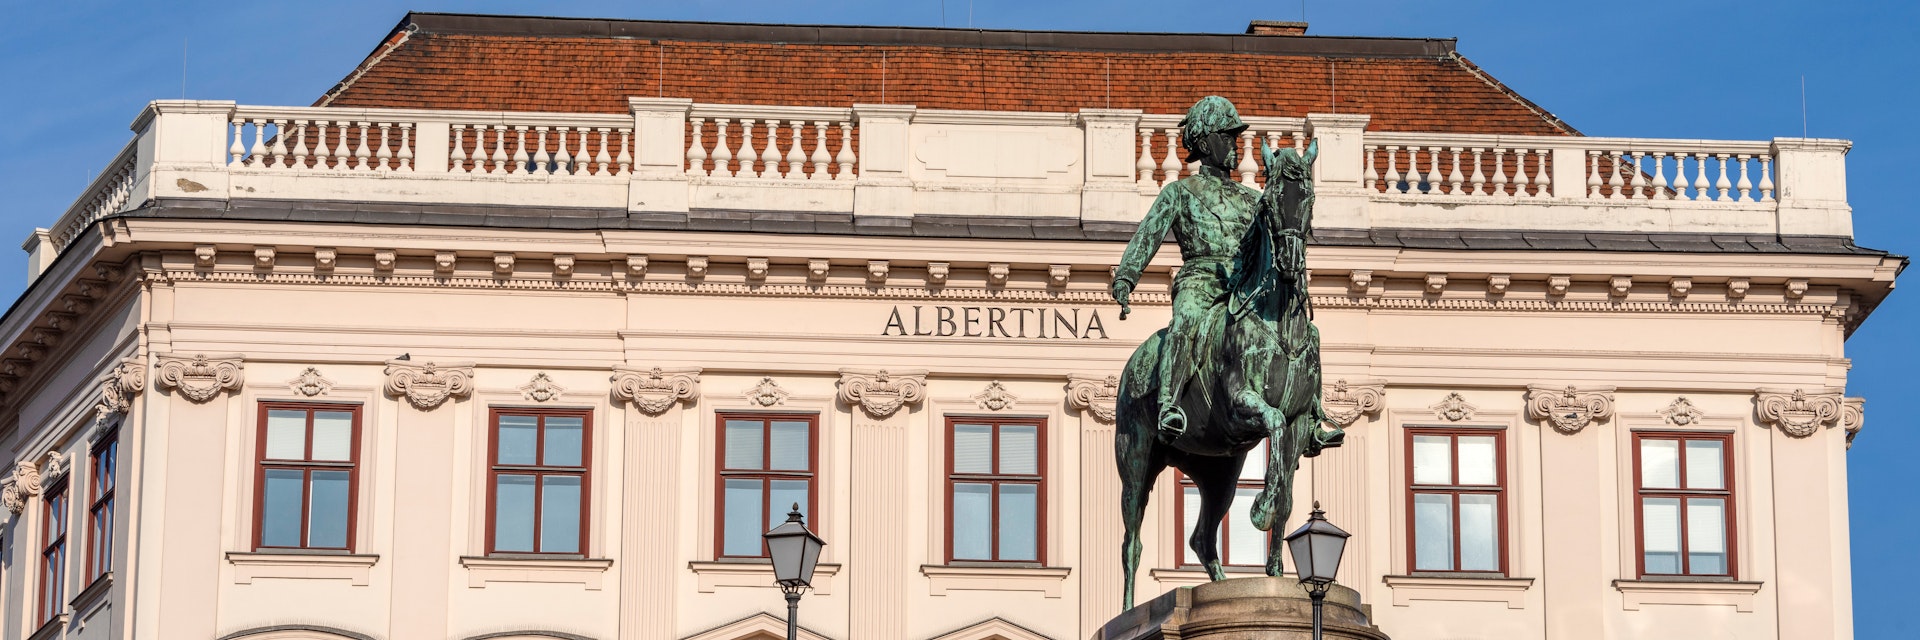 Front view of the Albertina museum.